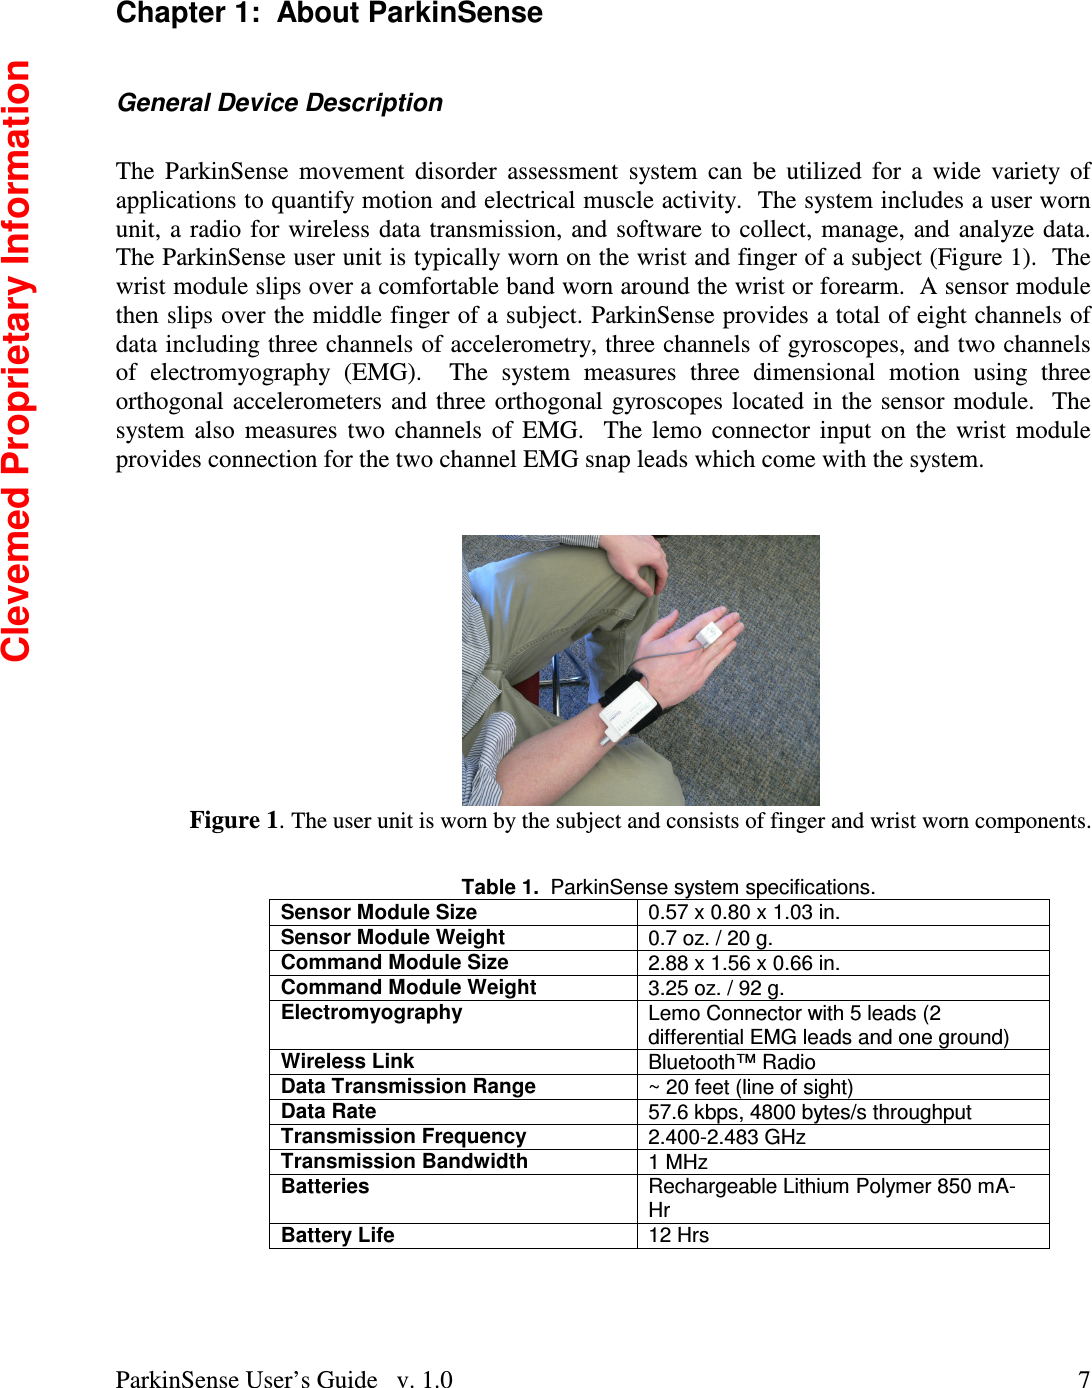 ParkinSense User’s Guide   v. 1.0  7Chapter 1:  About ParkinSense  General Device Description  The  ParkinSense  movement  disorder  assessment  system  can  be  utilized  for  a  wide  variety of applications to quantify motion and electrical muscle activity.  The system includes a user worn unit, a radio for wireless data transmission, and software to collect, manage, and analyze data.  The ParkinSense user unit is typically worn on the wrist and finger of a subject (Figure 1).  The wrist module slips over a comfortable band worn around the wrist or forearm.  A sensor module then slips over the middle finger of a subject. ParkinSense provides a total of eight channels of data including three channels of accelerometry, three channels of gyroscopes, and two channels of  electromyography  (EMG).    The  system  measures  three  dimensional  motion  using  three orthogonal accelerometers and three orthogonal gyroscopes located in the sensor module.  The system also  measures  two  channels of EMG.  The lemo connector input  on  the wrist module provides connection for the two channel EMG snap leads which come with the system.    Figure 1. The user unit is worn by the subject and consists of finger and wrist worn components.   Table 1.  ParkinSense system specifications. Sensor Module Size  0.57 x 0.80 x 1.03 in. Sensor Module Weight  0.7 oz. / 20 g. Command Module Size  2.88 x 1.56 x 0.66 in. Command Module Weight  3.25 oz. / 92 g. Electromyography  Lemo Connector with 5 leads (2 differential EMG leads and one ground) Wireless Link  Bluetooth™ Radio Data Transmission Range  ~ 20 feet (line of sight) Data Rate  57.6 kbps, 4800 bytes/s throughput Transmission Frequency  2.400-2.483 GHz Transmission Bandwidth  1 MHz Batteries  Rechargeable Lithium Polymer 850 mA-Hr Battery Life  12 Hrs  Clevemed Proprietary Information